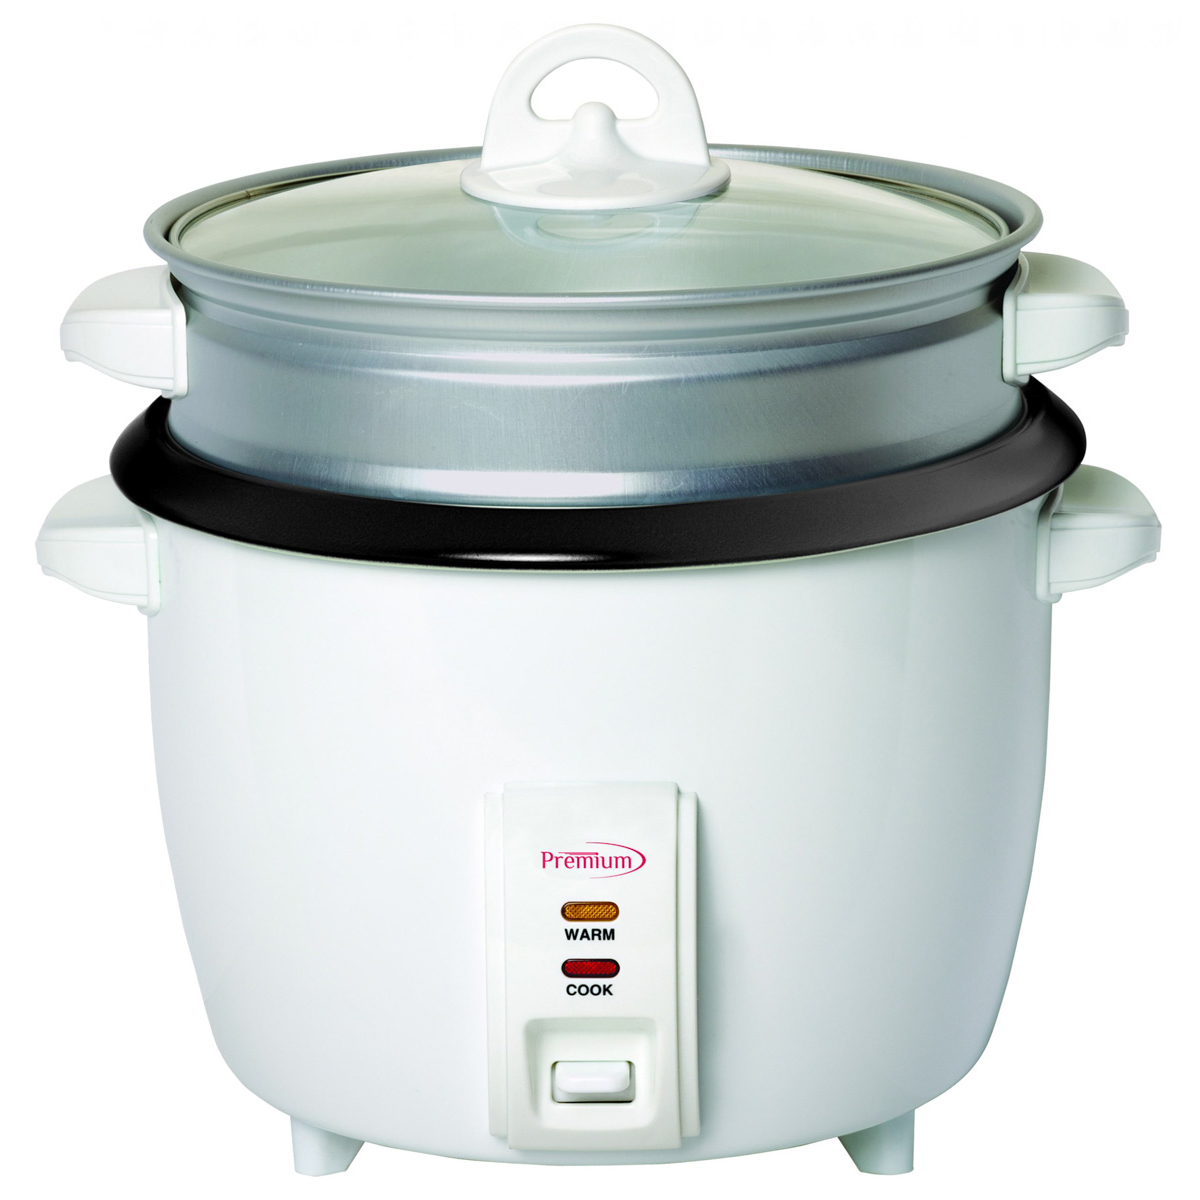 Rice cooker/ 2 cup rice cooker/Lorena Bella cooker for Sale in